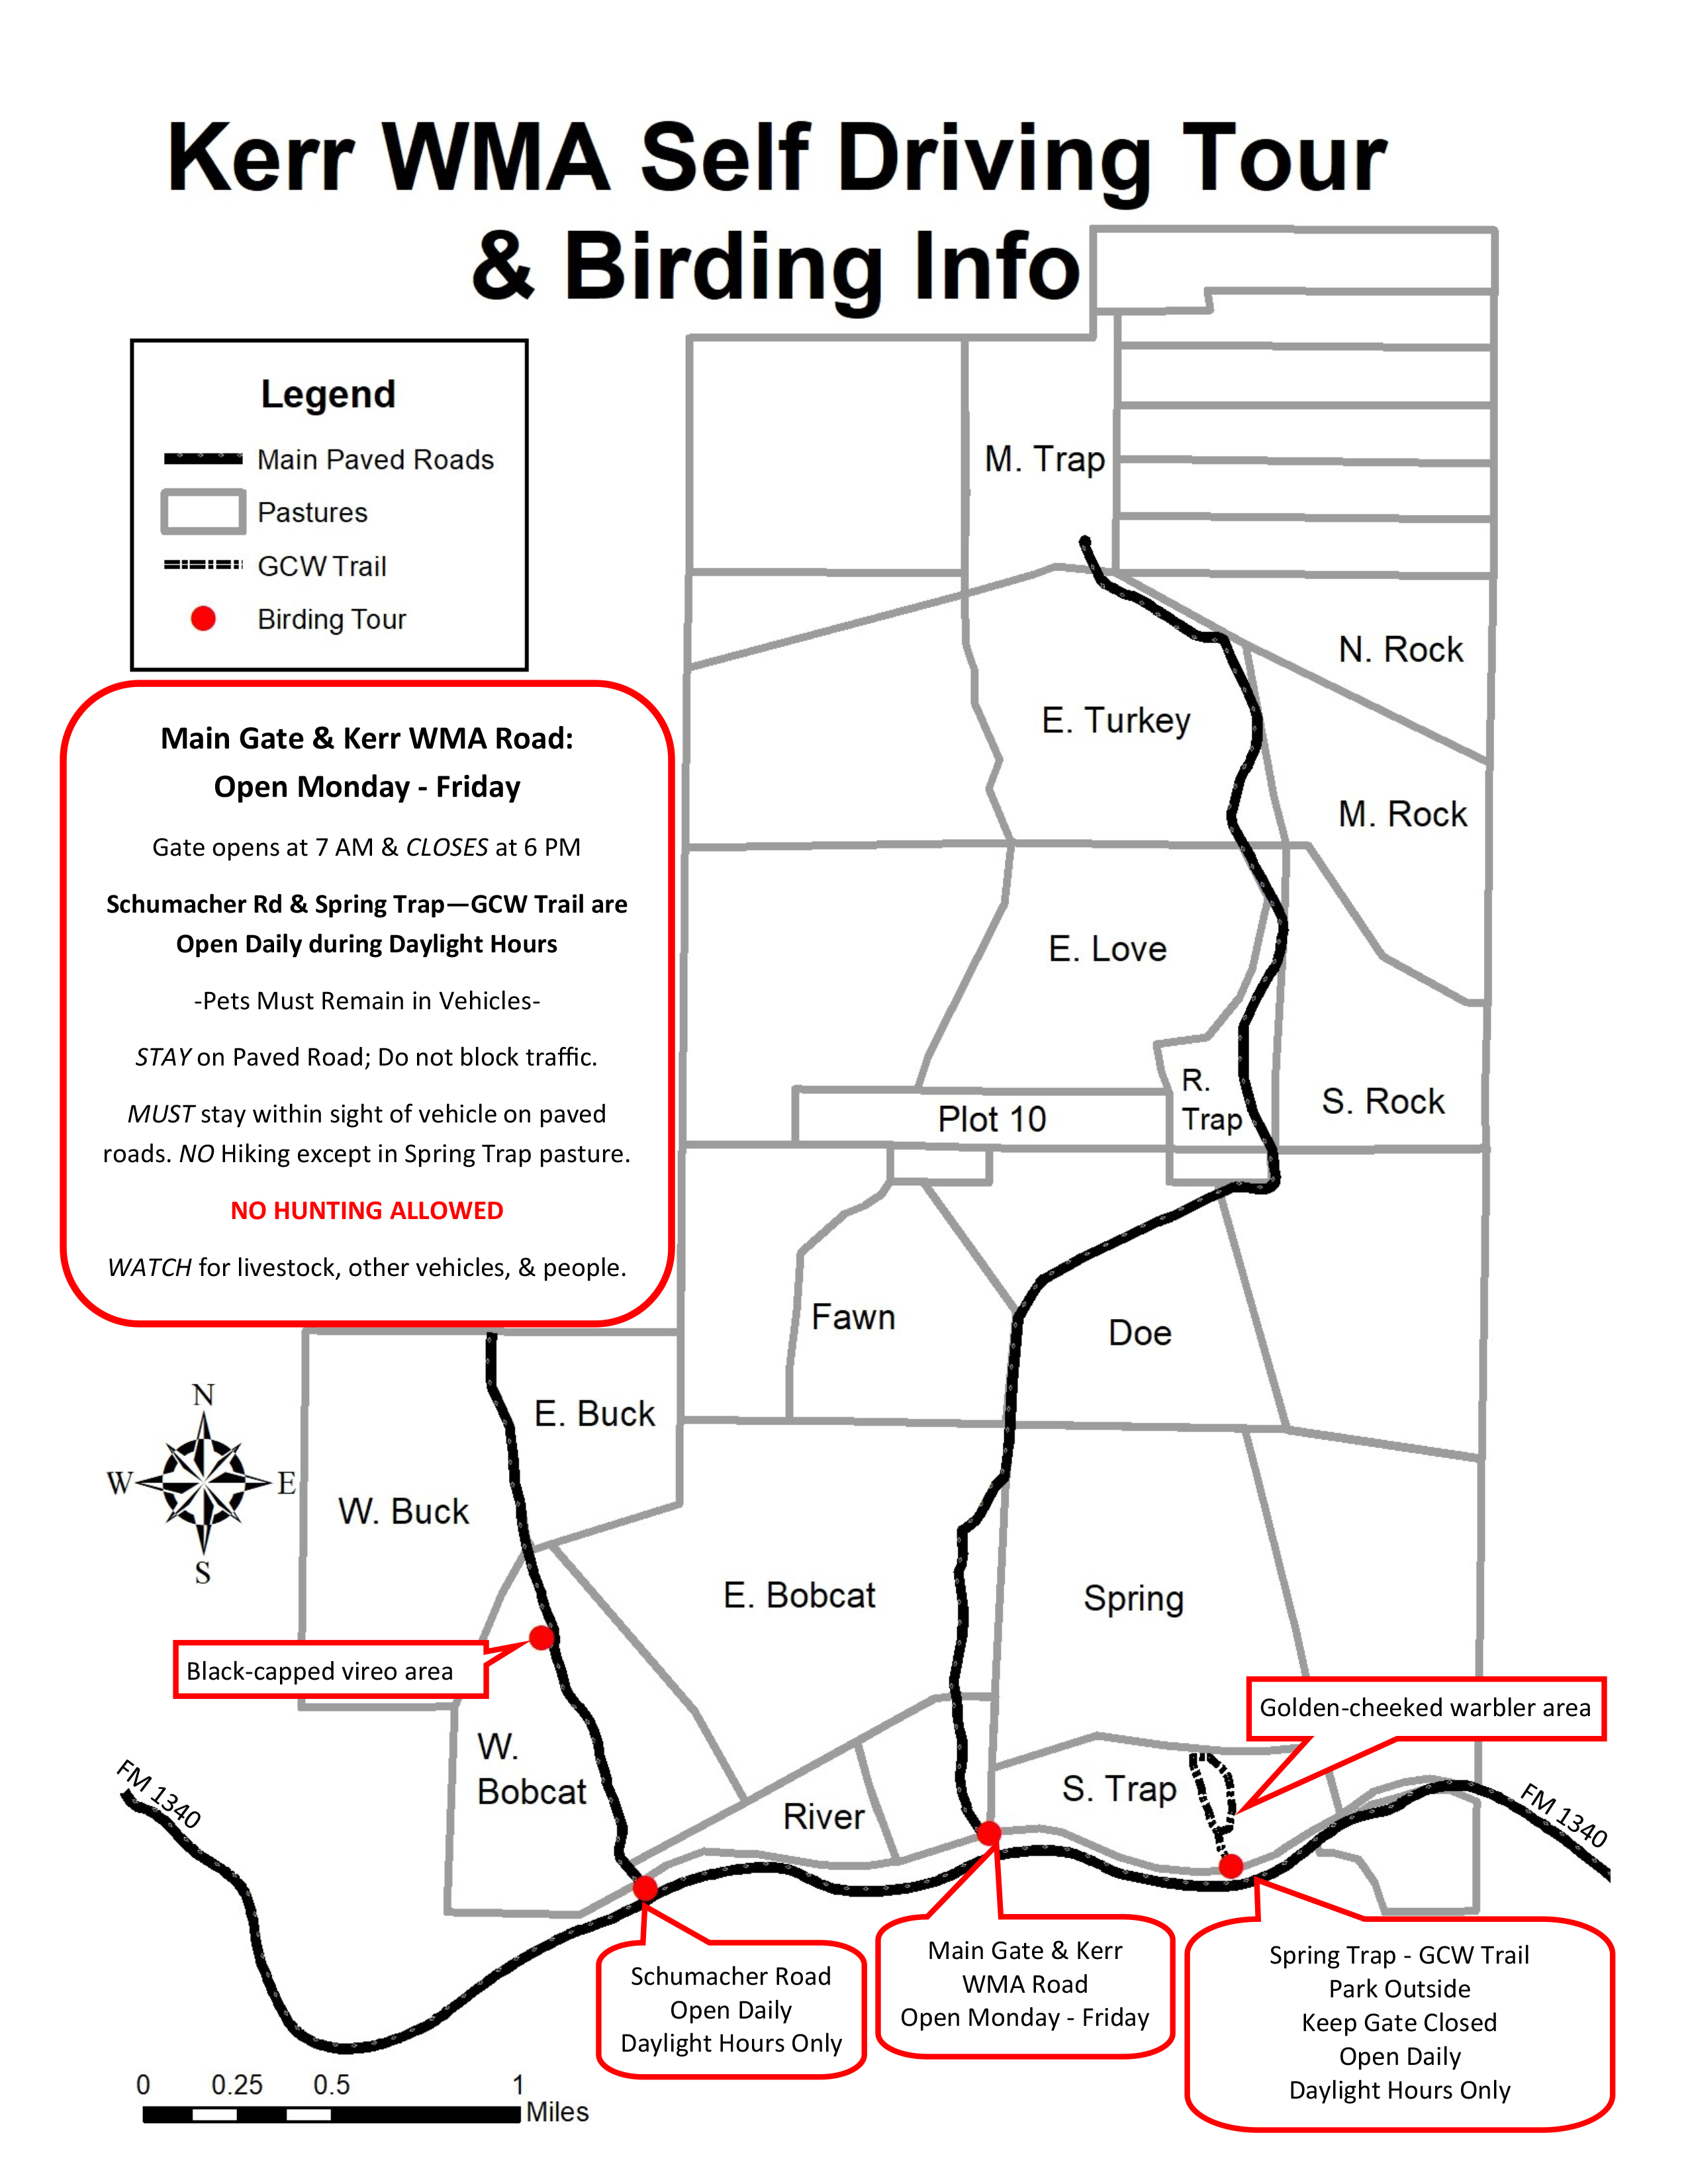 click to open the Kerr WMA Driving Tour and Birding Map in a new tab